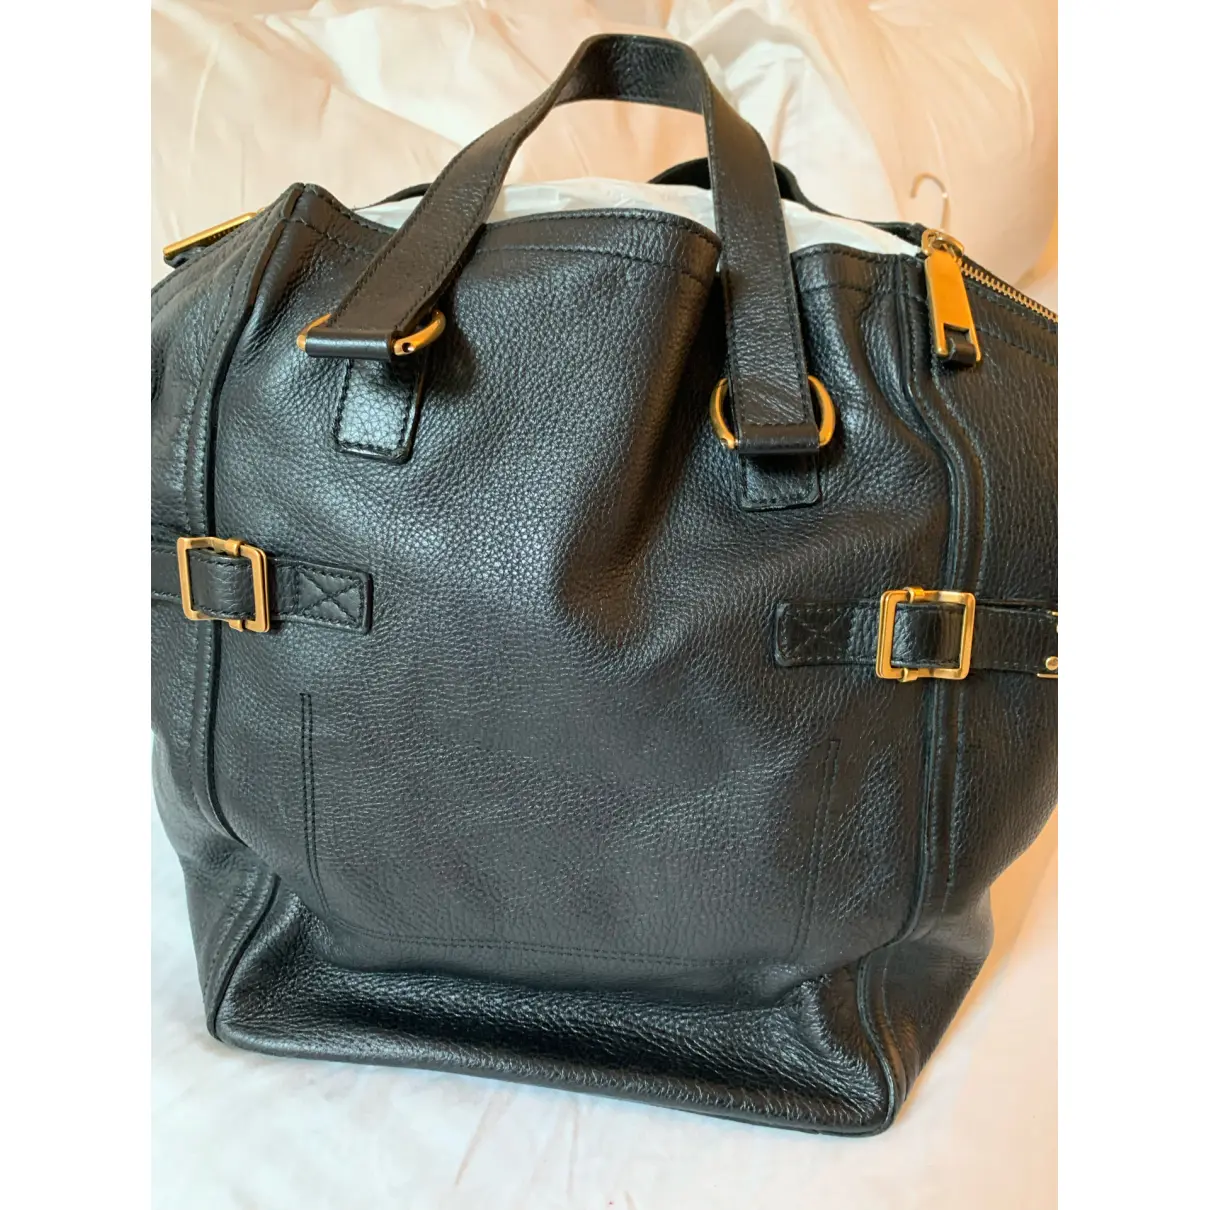 Buy Yves Saint Laurent Downtown leather tote online